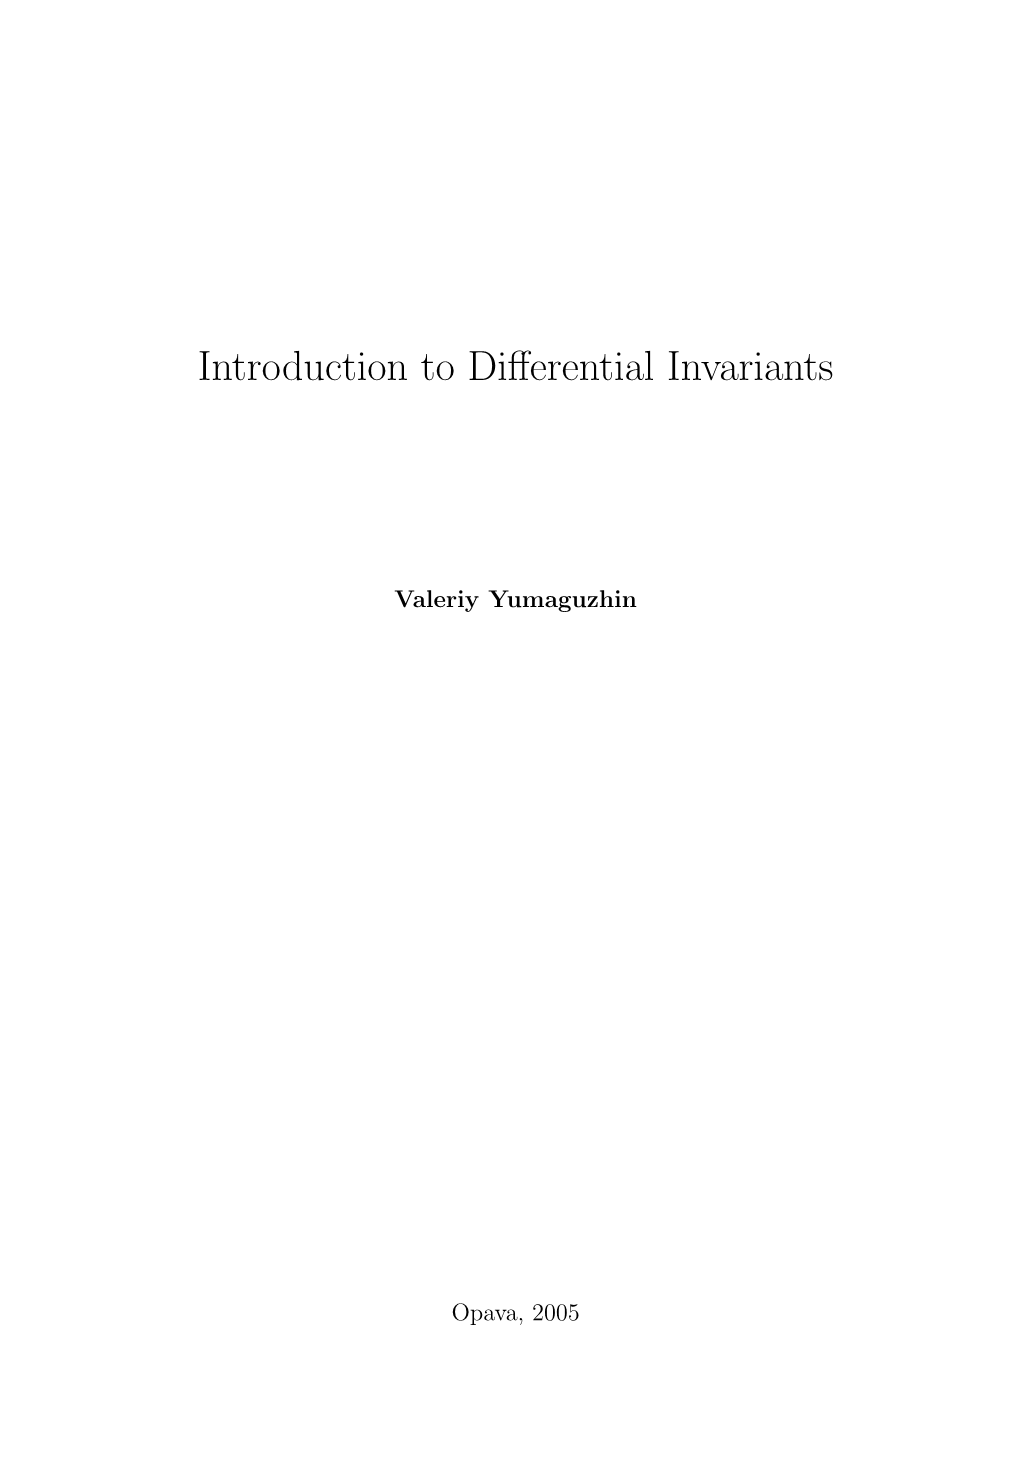 Introduction to Differential Invariants